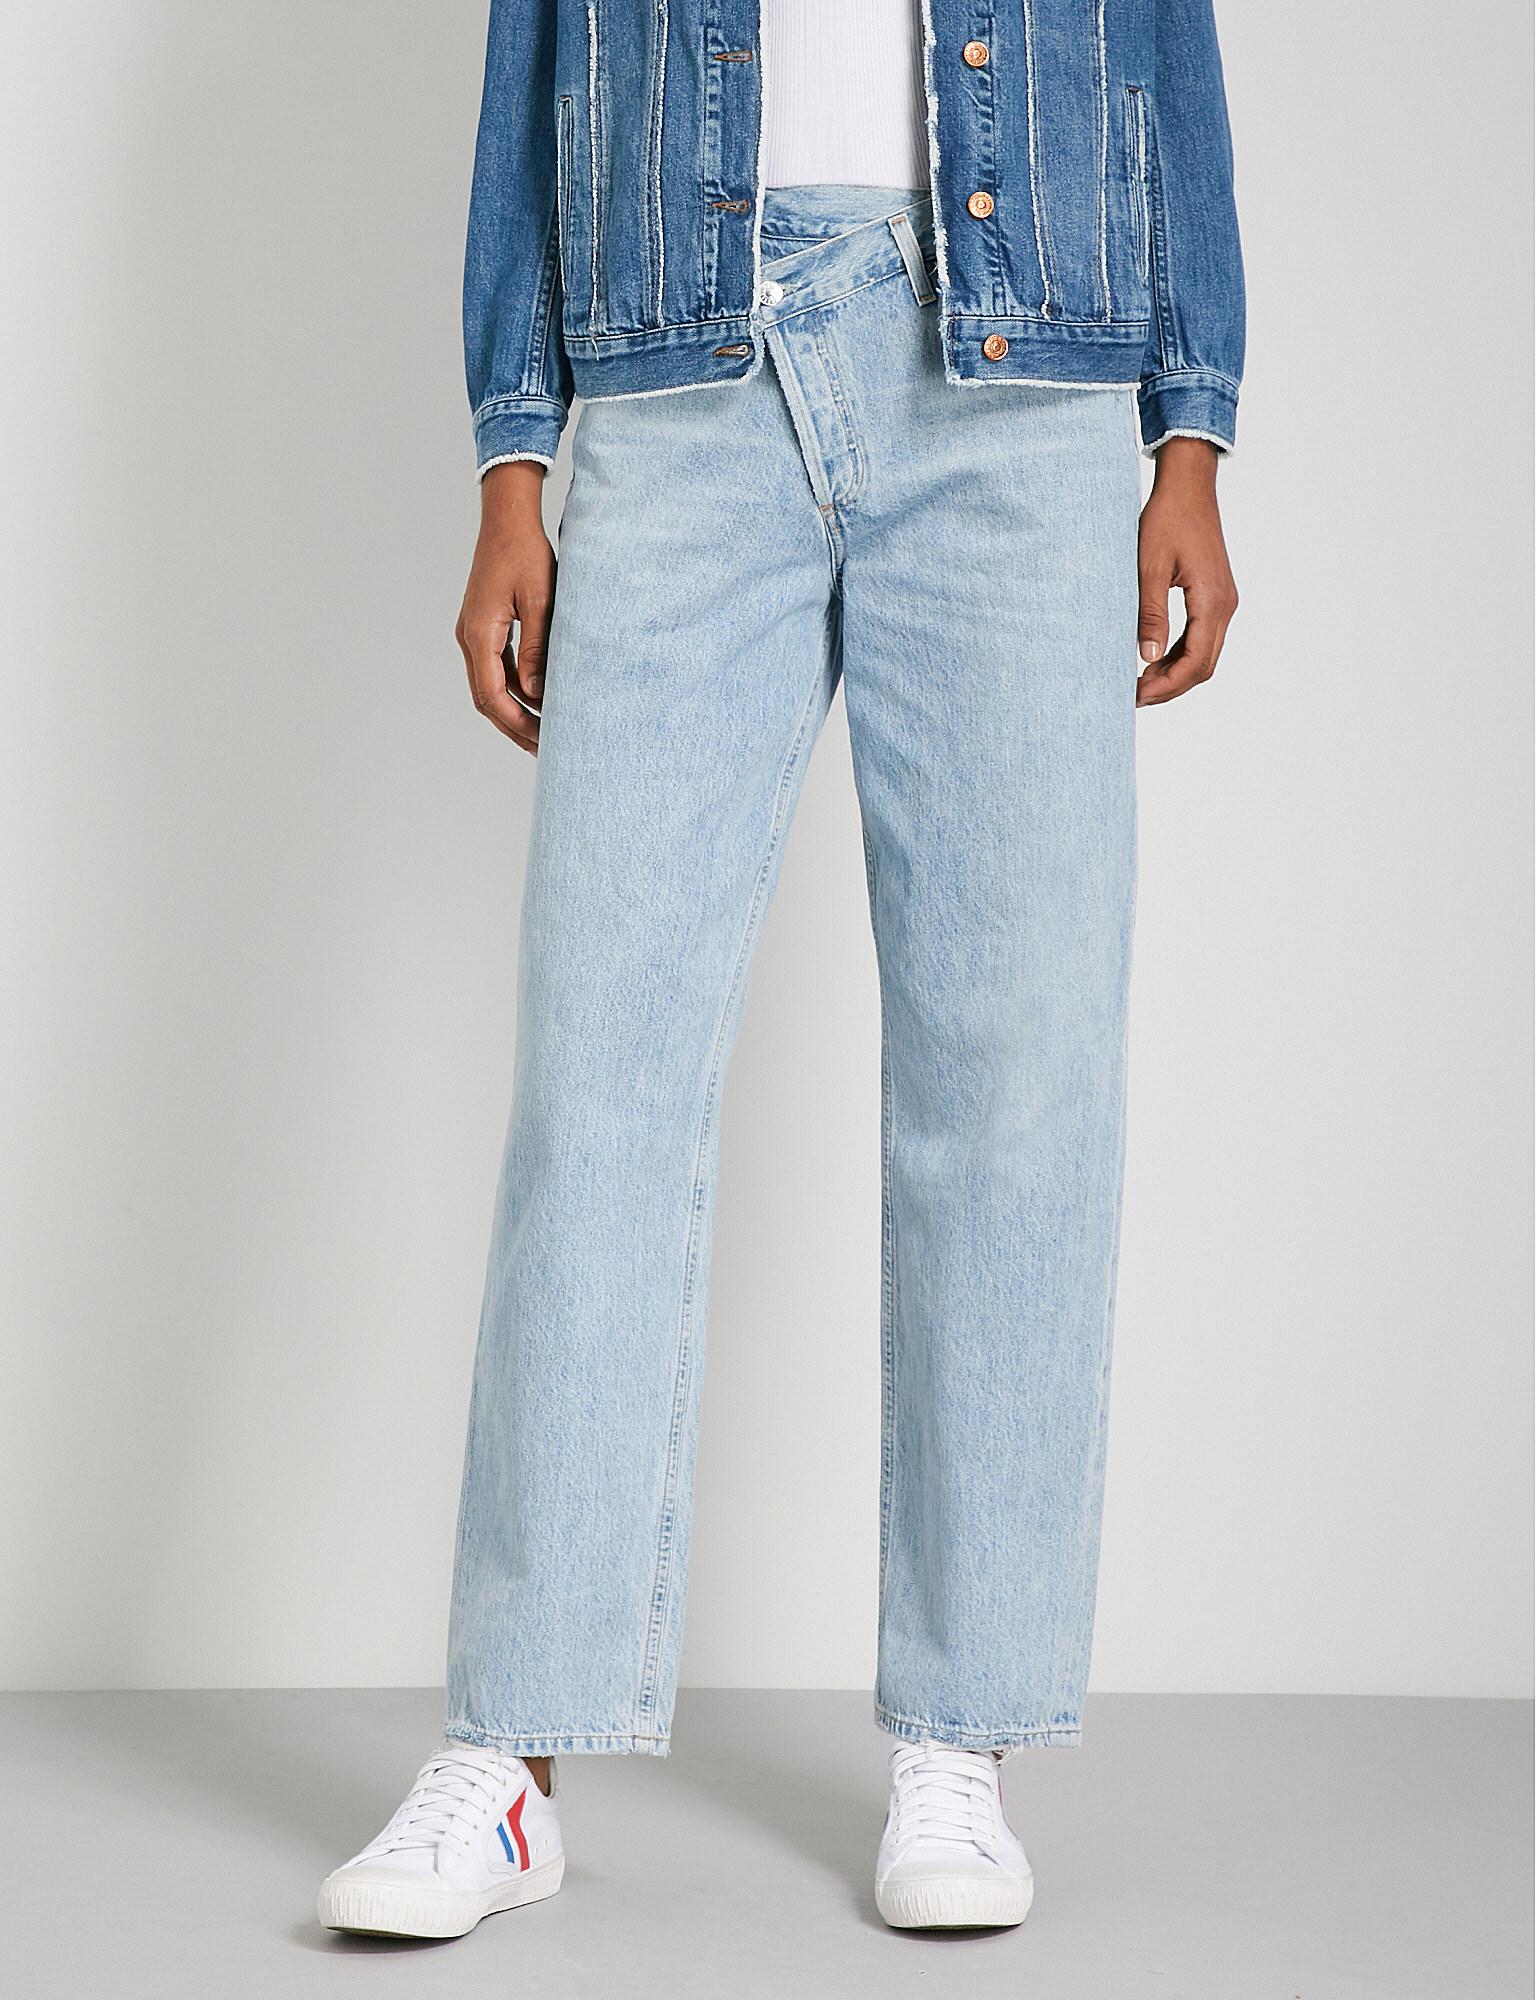 Agolde Criss Cross Straight Mid-rise Jeans in Blue | Lyst